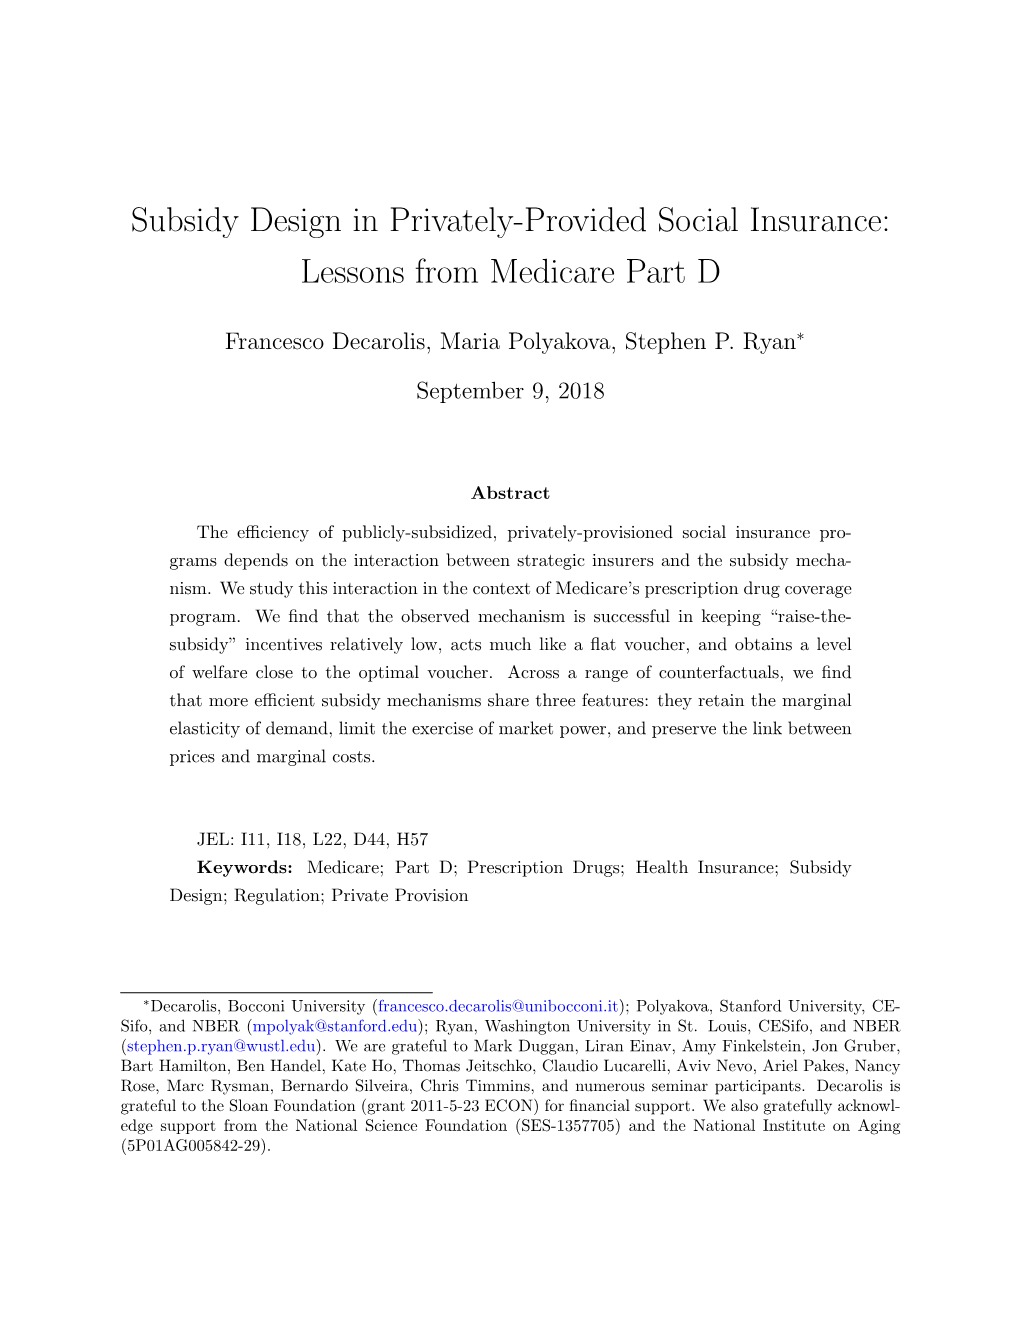 Subsidy Design in Privately-Provided Social Insurance: Lessons from Medicare Part D